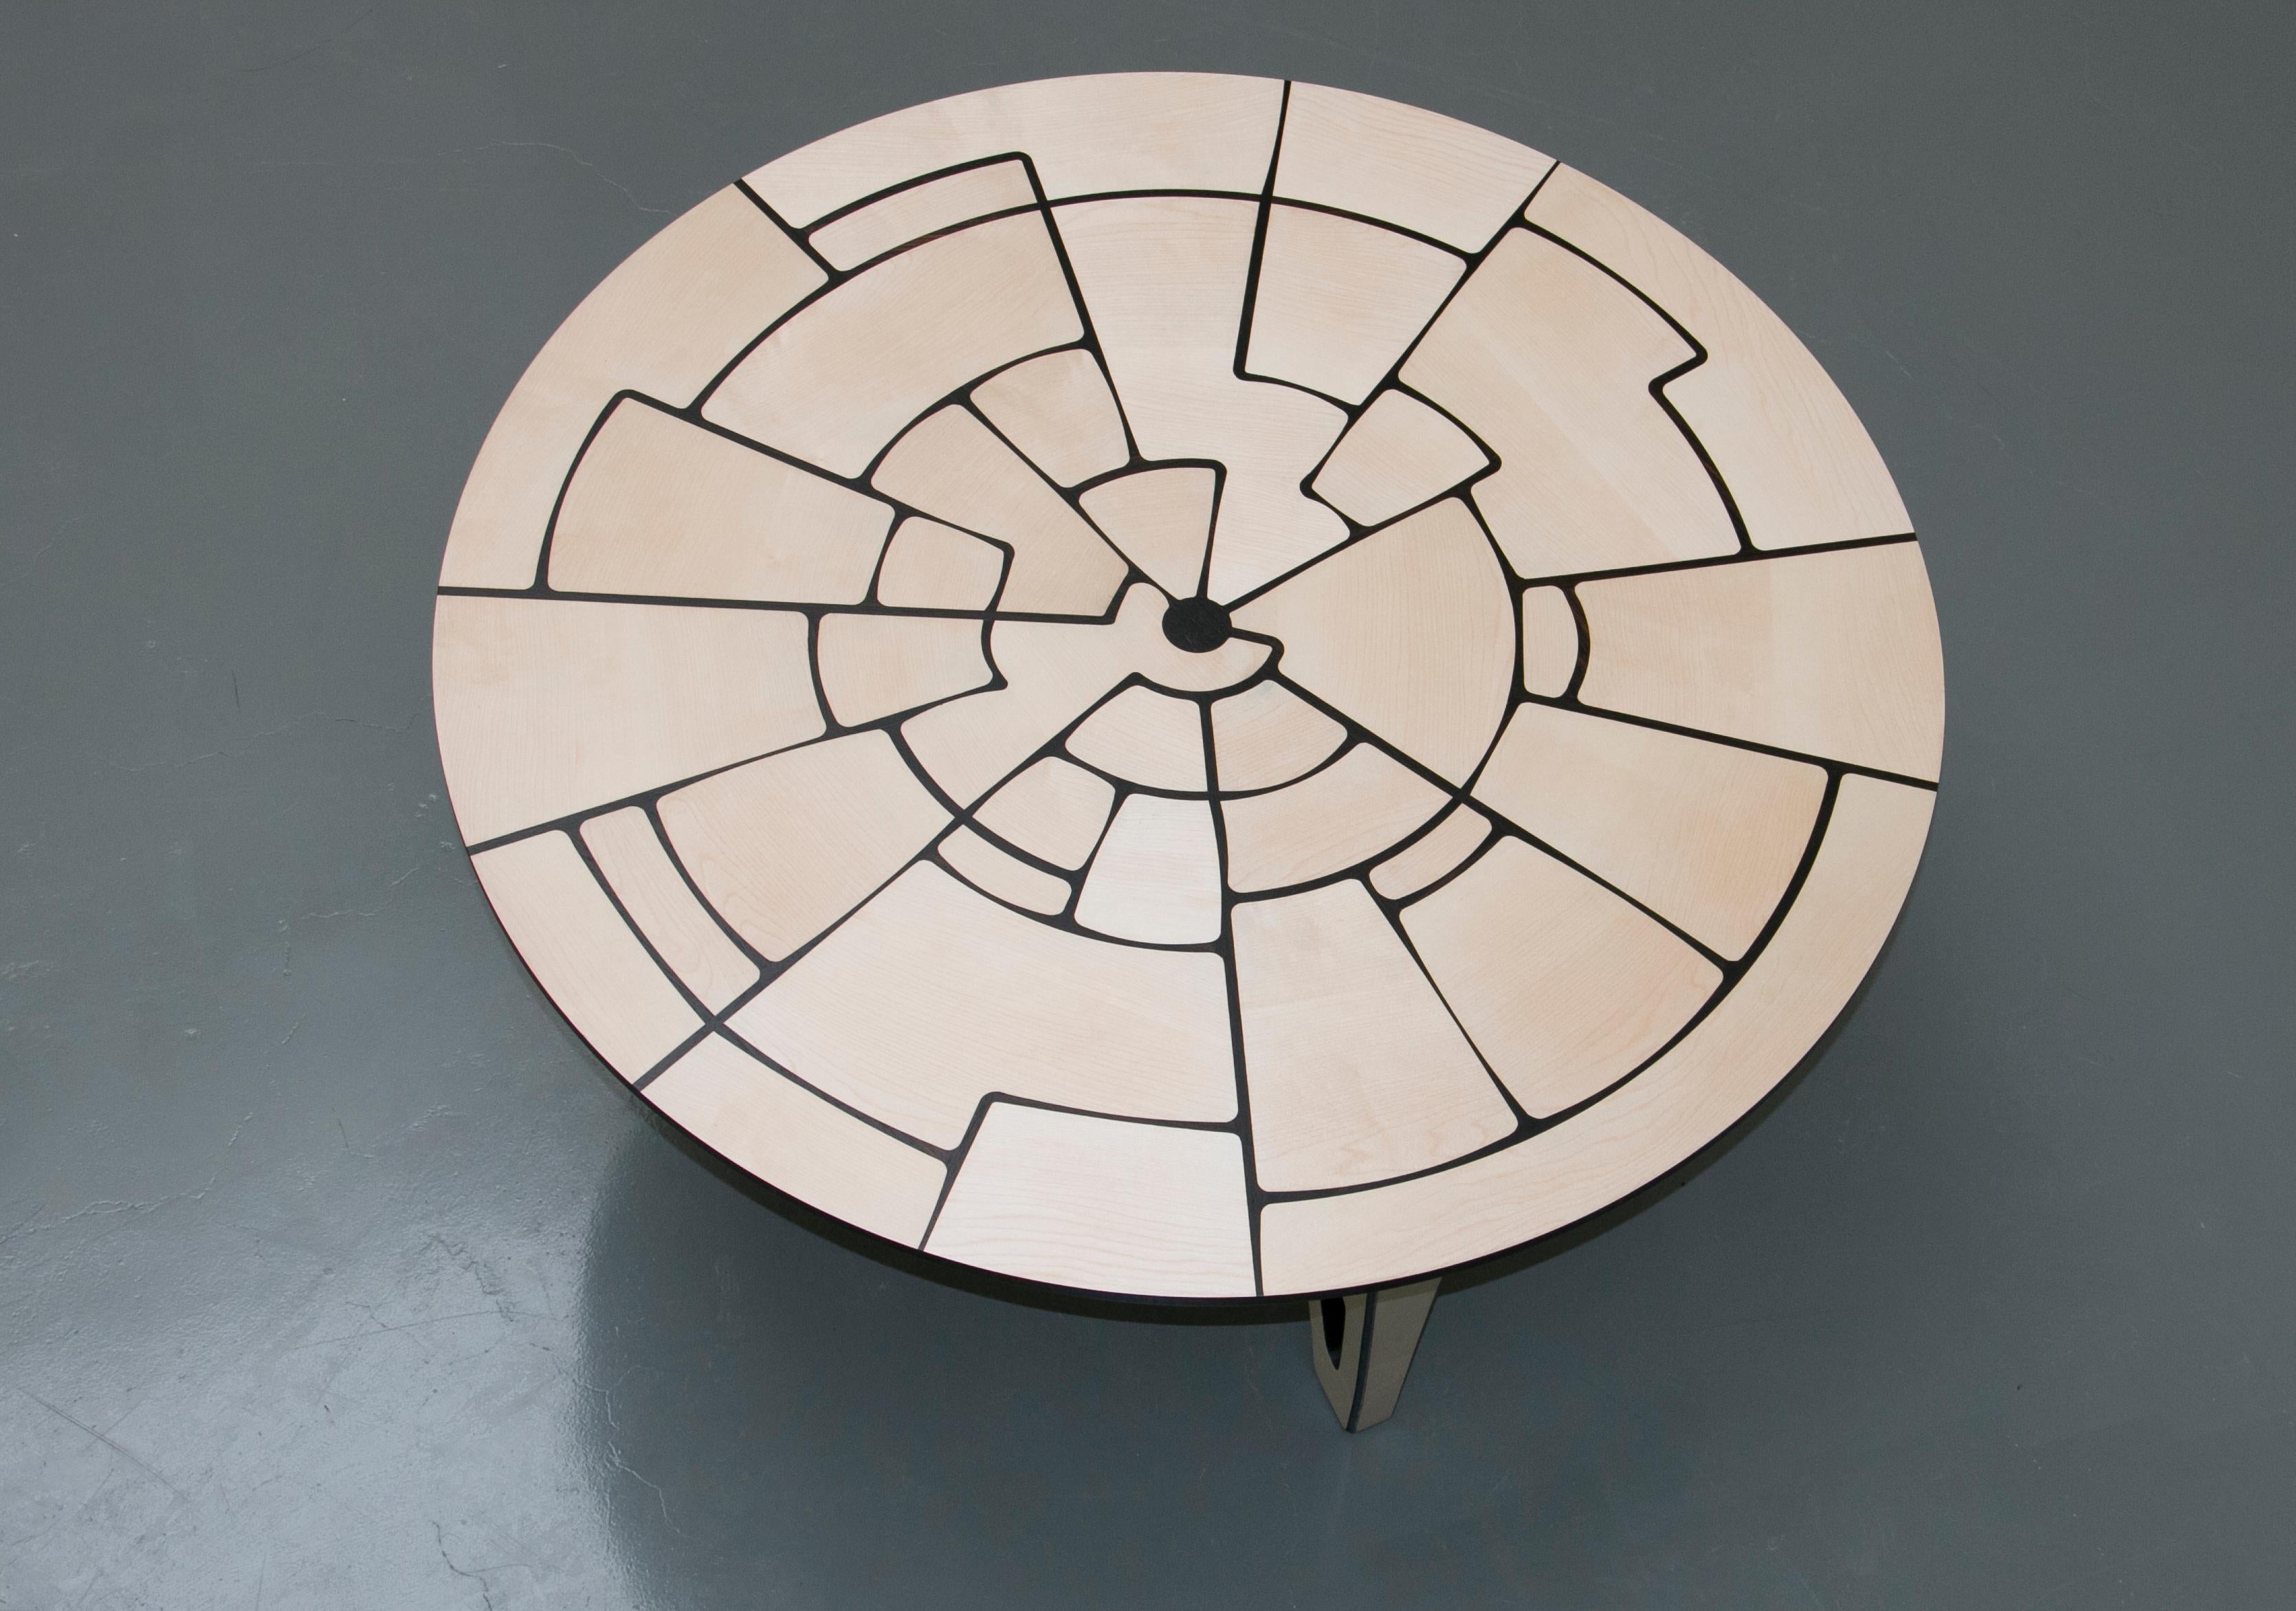 Successfully introduced at the Milan Design Week 2019, this handmade table completed in the traditional inlay technique was conceived by Ivan Paradisi with the idea of an intricate geometrical pattern that is disclosing a series of 